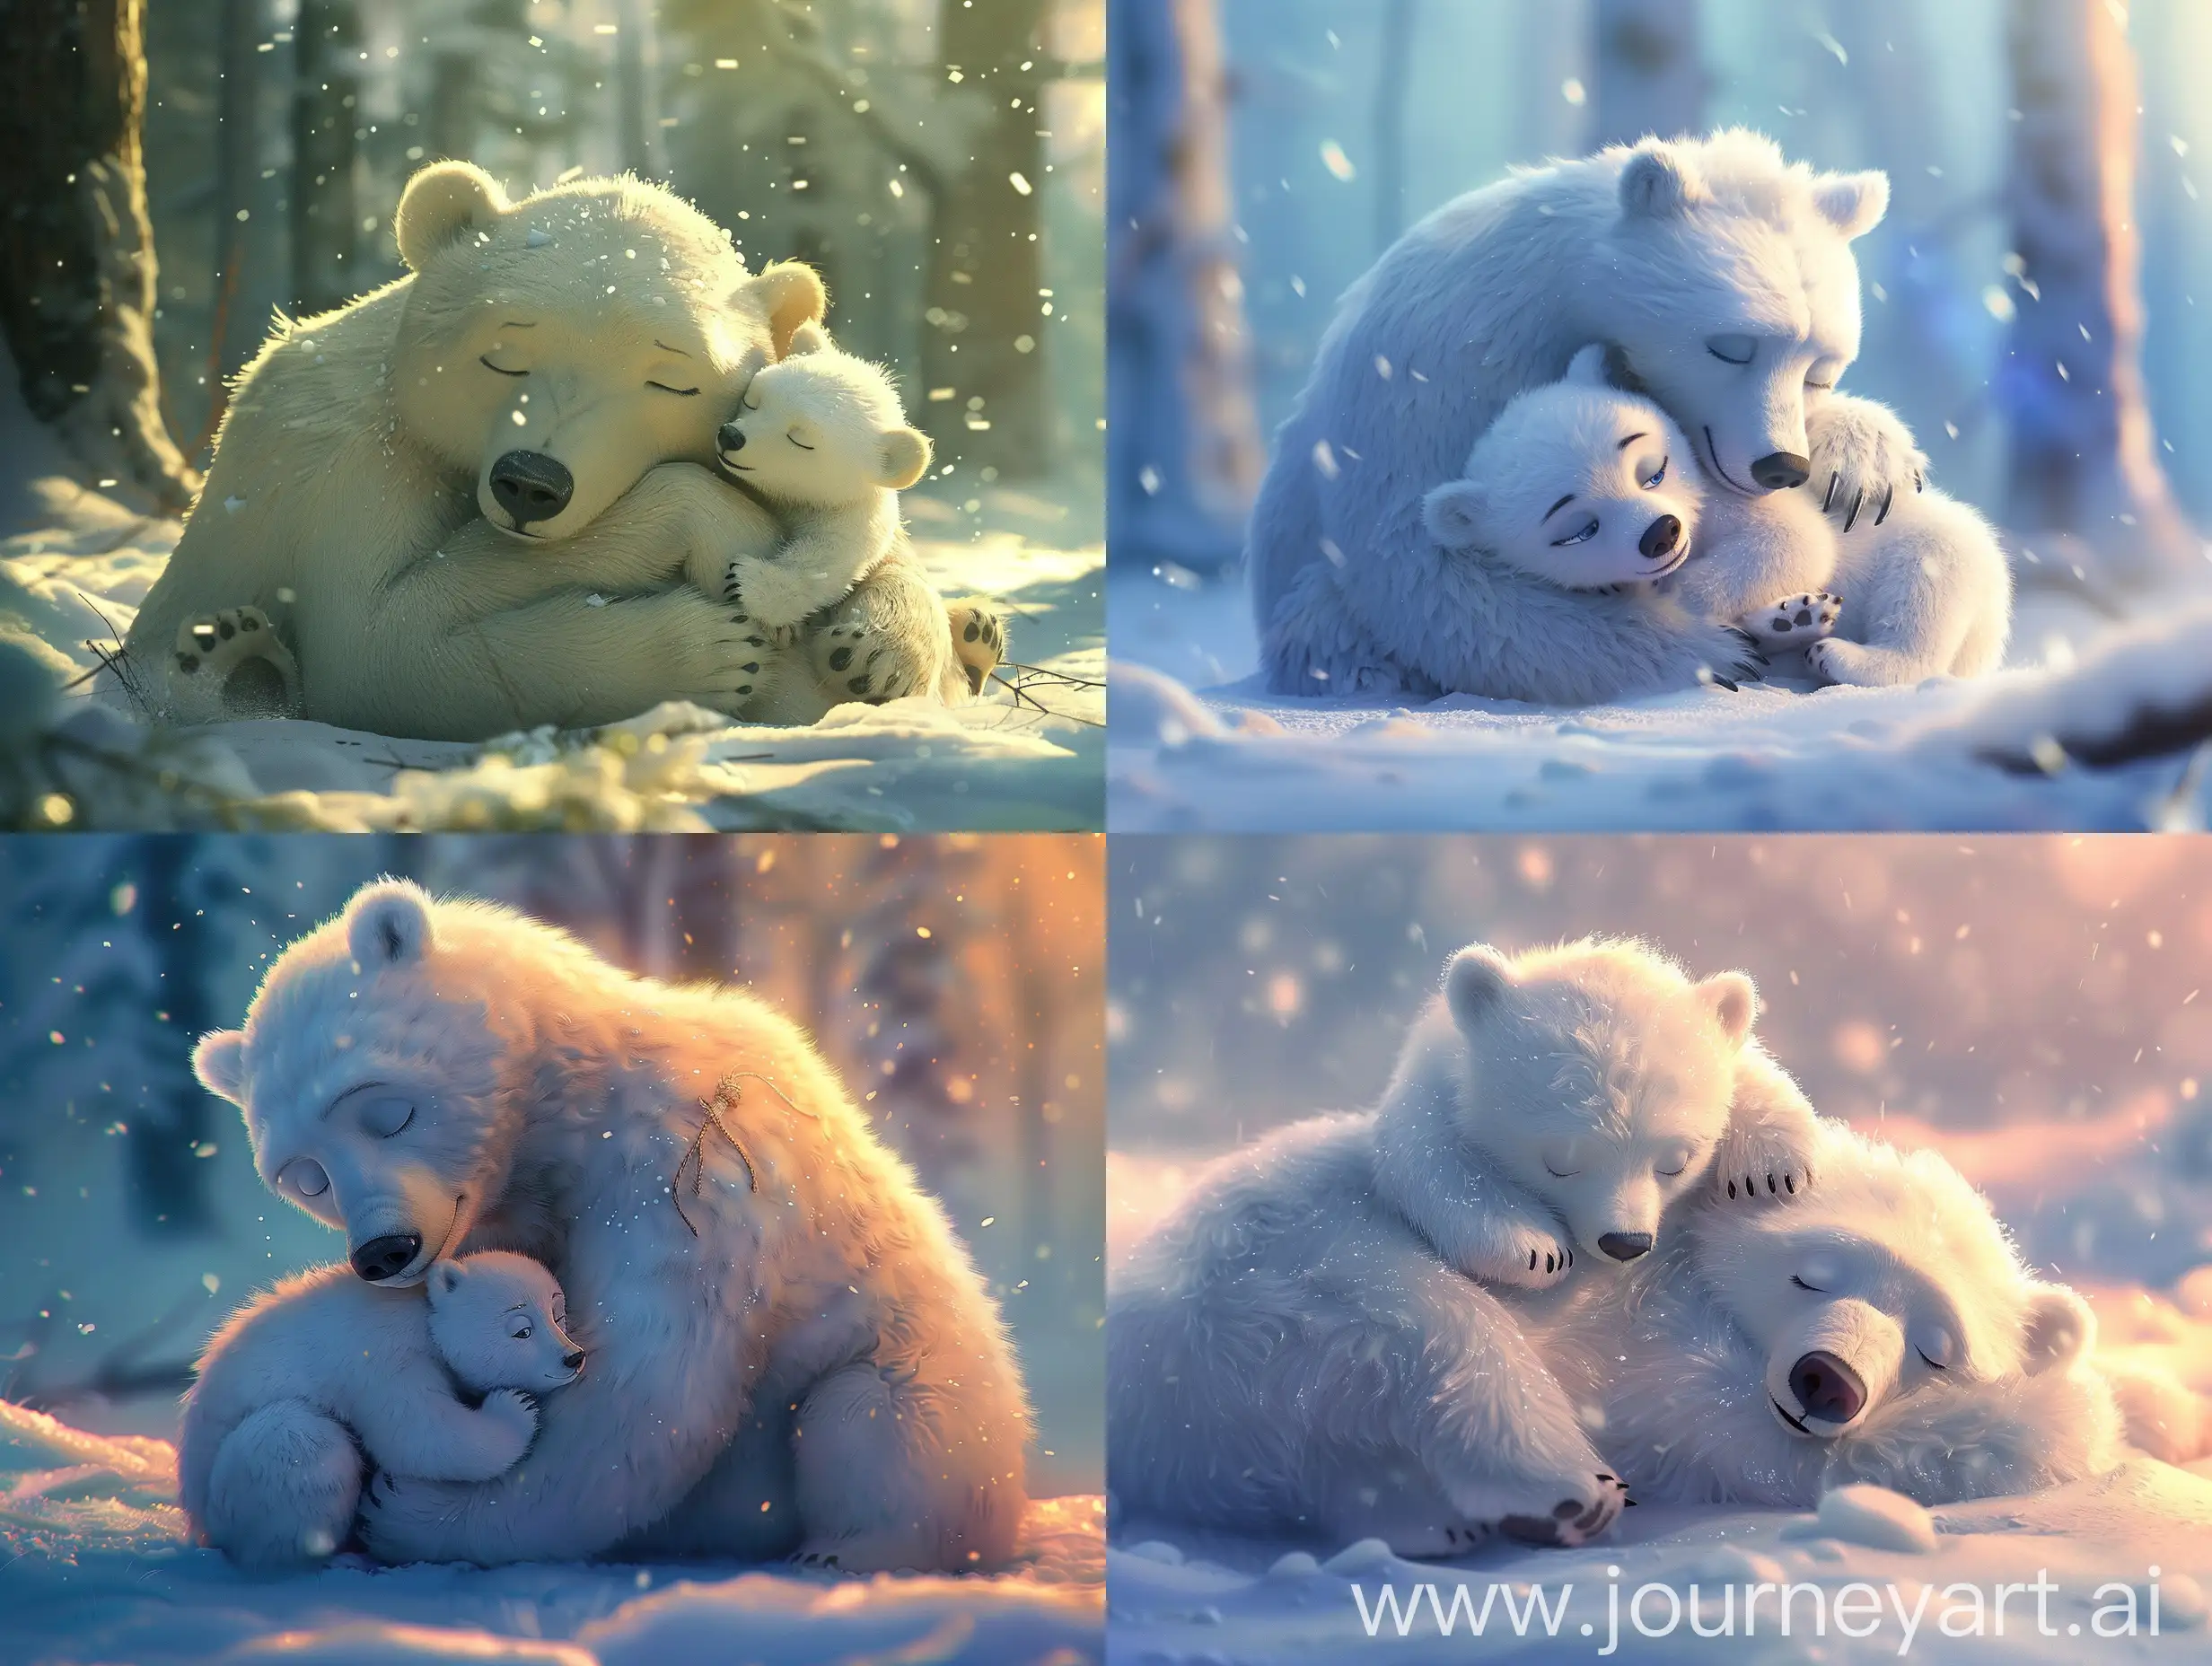 Heartwarming-Scene-of-a-Baby-Bear-Comforting-Injured-Mother-in-Snowy-Setting